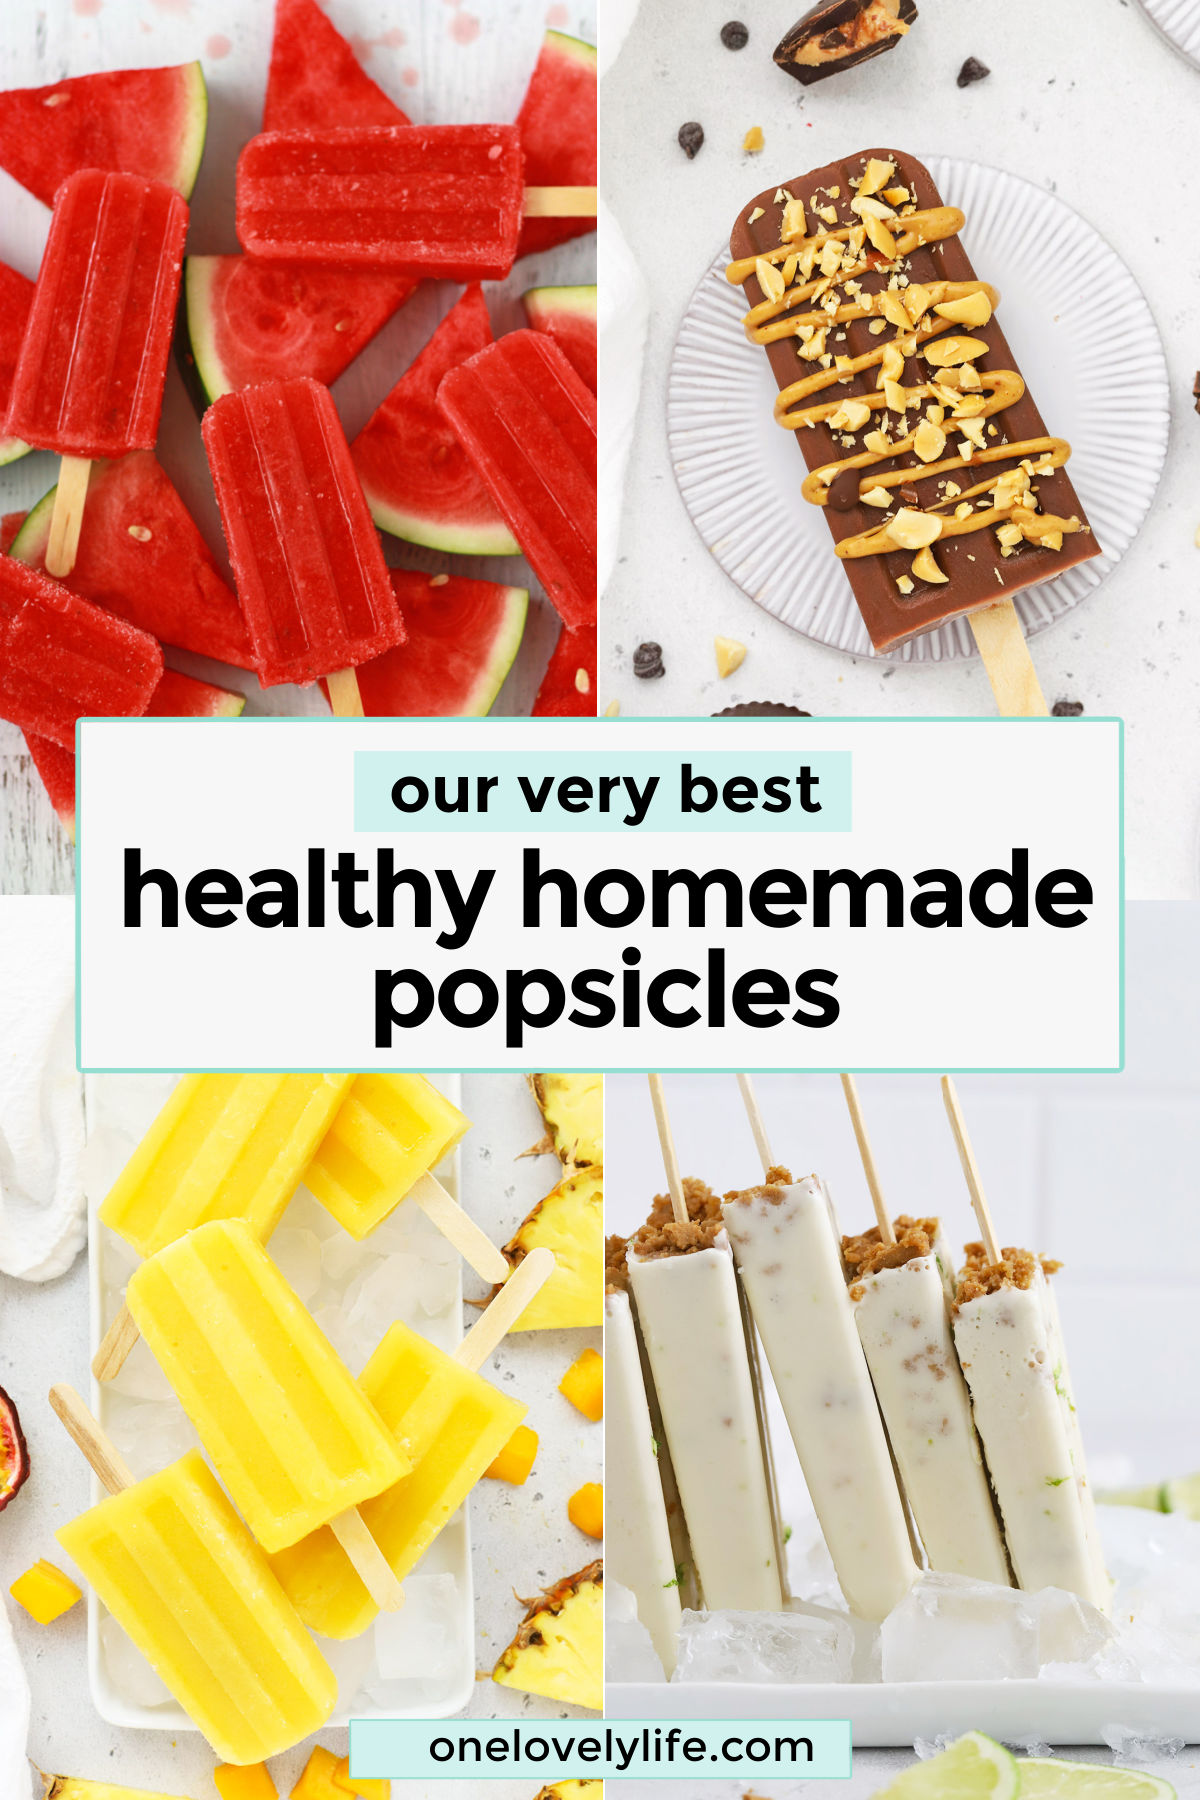 The BEST Healthy Homemade Popsicles - Some of the BEST healthy popsicle recipes on the net! (Naturally-sweetened, gluten-free & dairy-free!) // Homemade Popsicle Recipe // Healthy Popsicles // Vegan Popsicles // Paleo Popsicles // Healthy Ice Pops